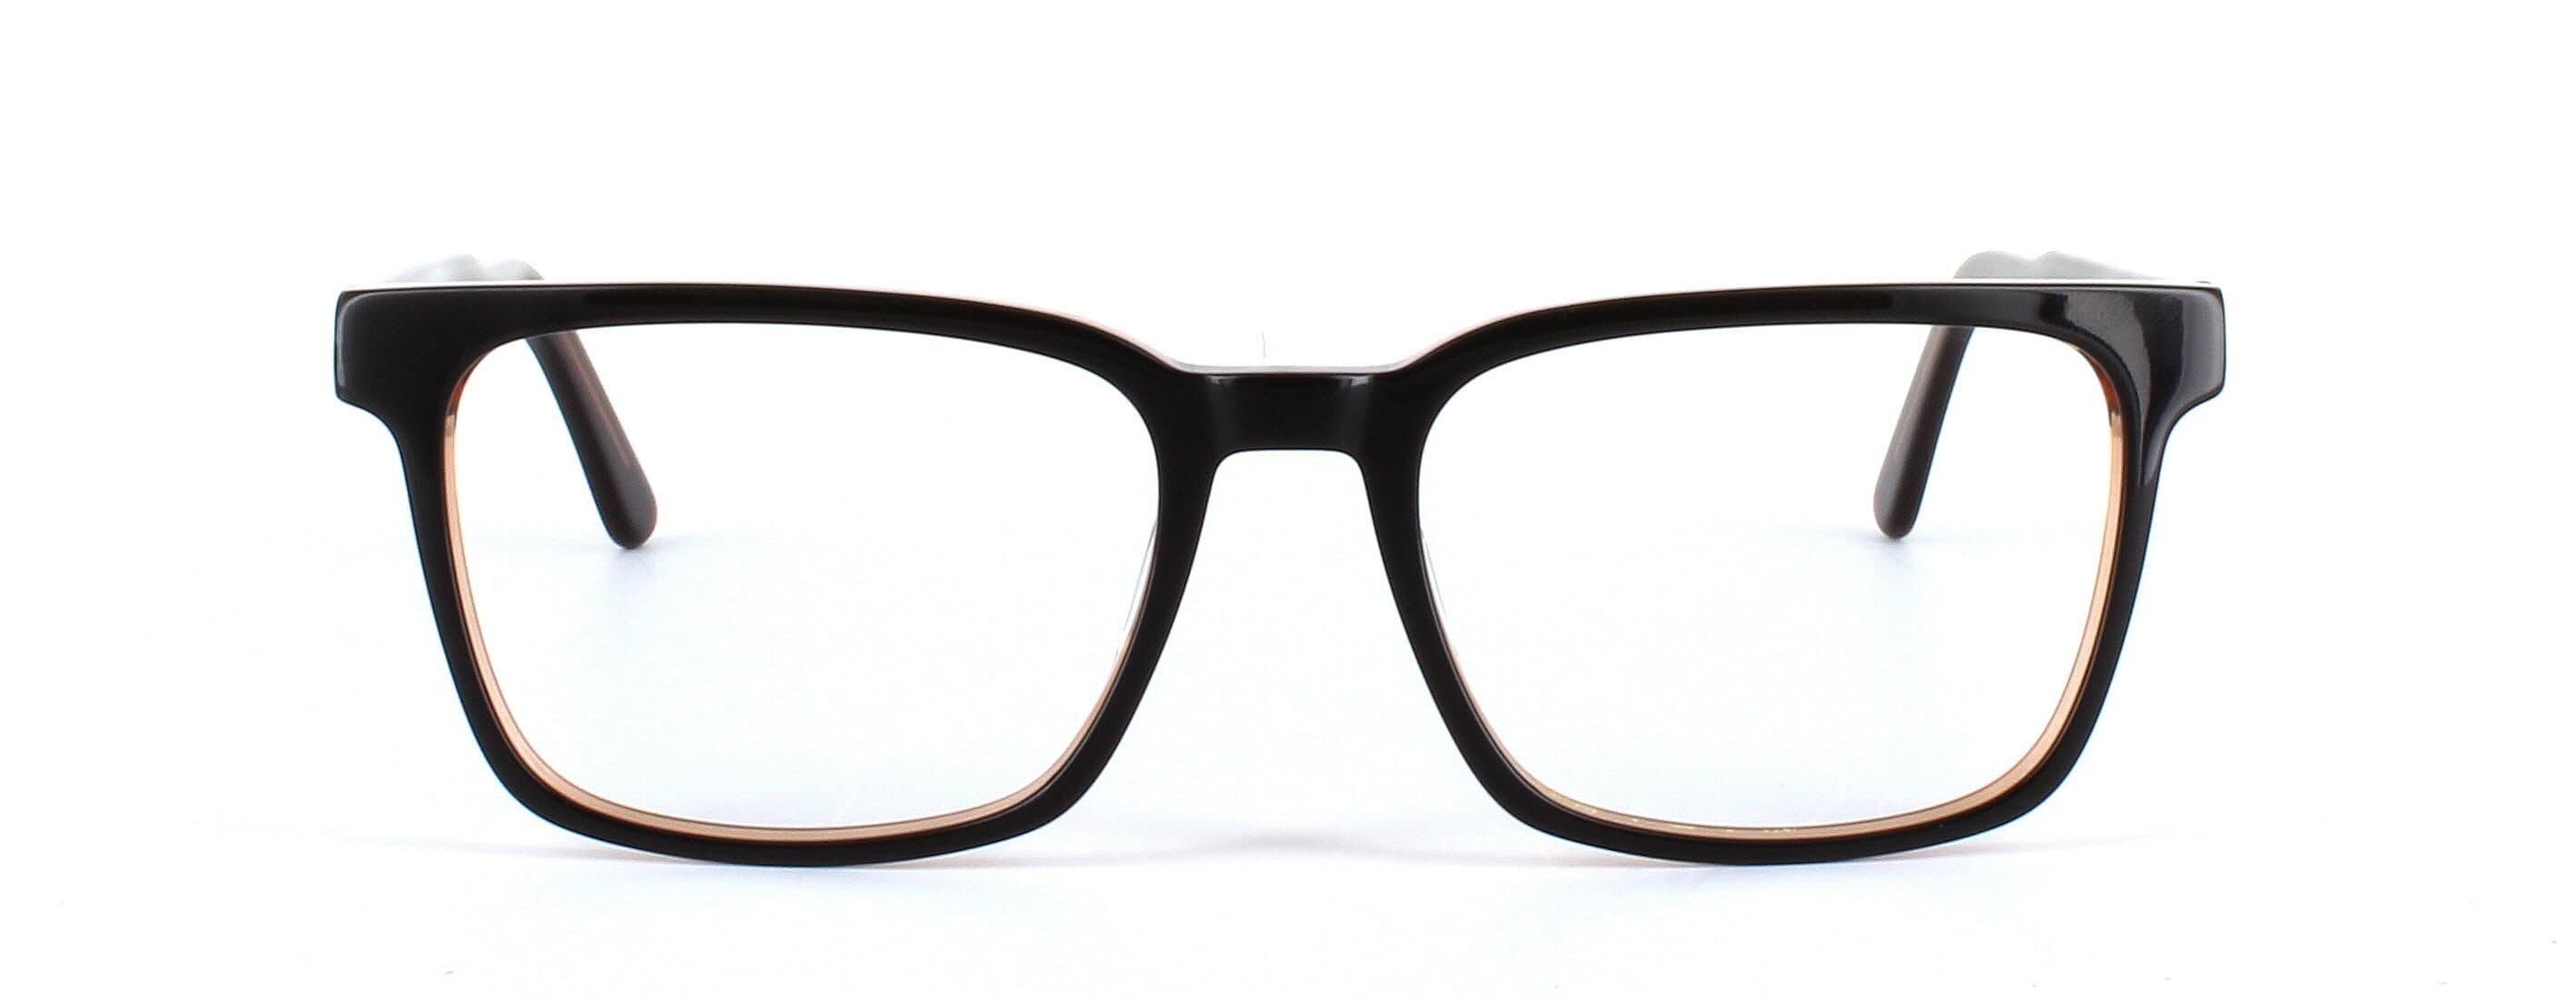 Sparta - Gents acetate glasses in brown - image view 5